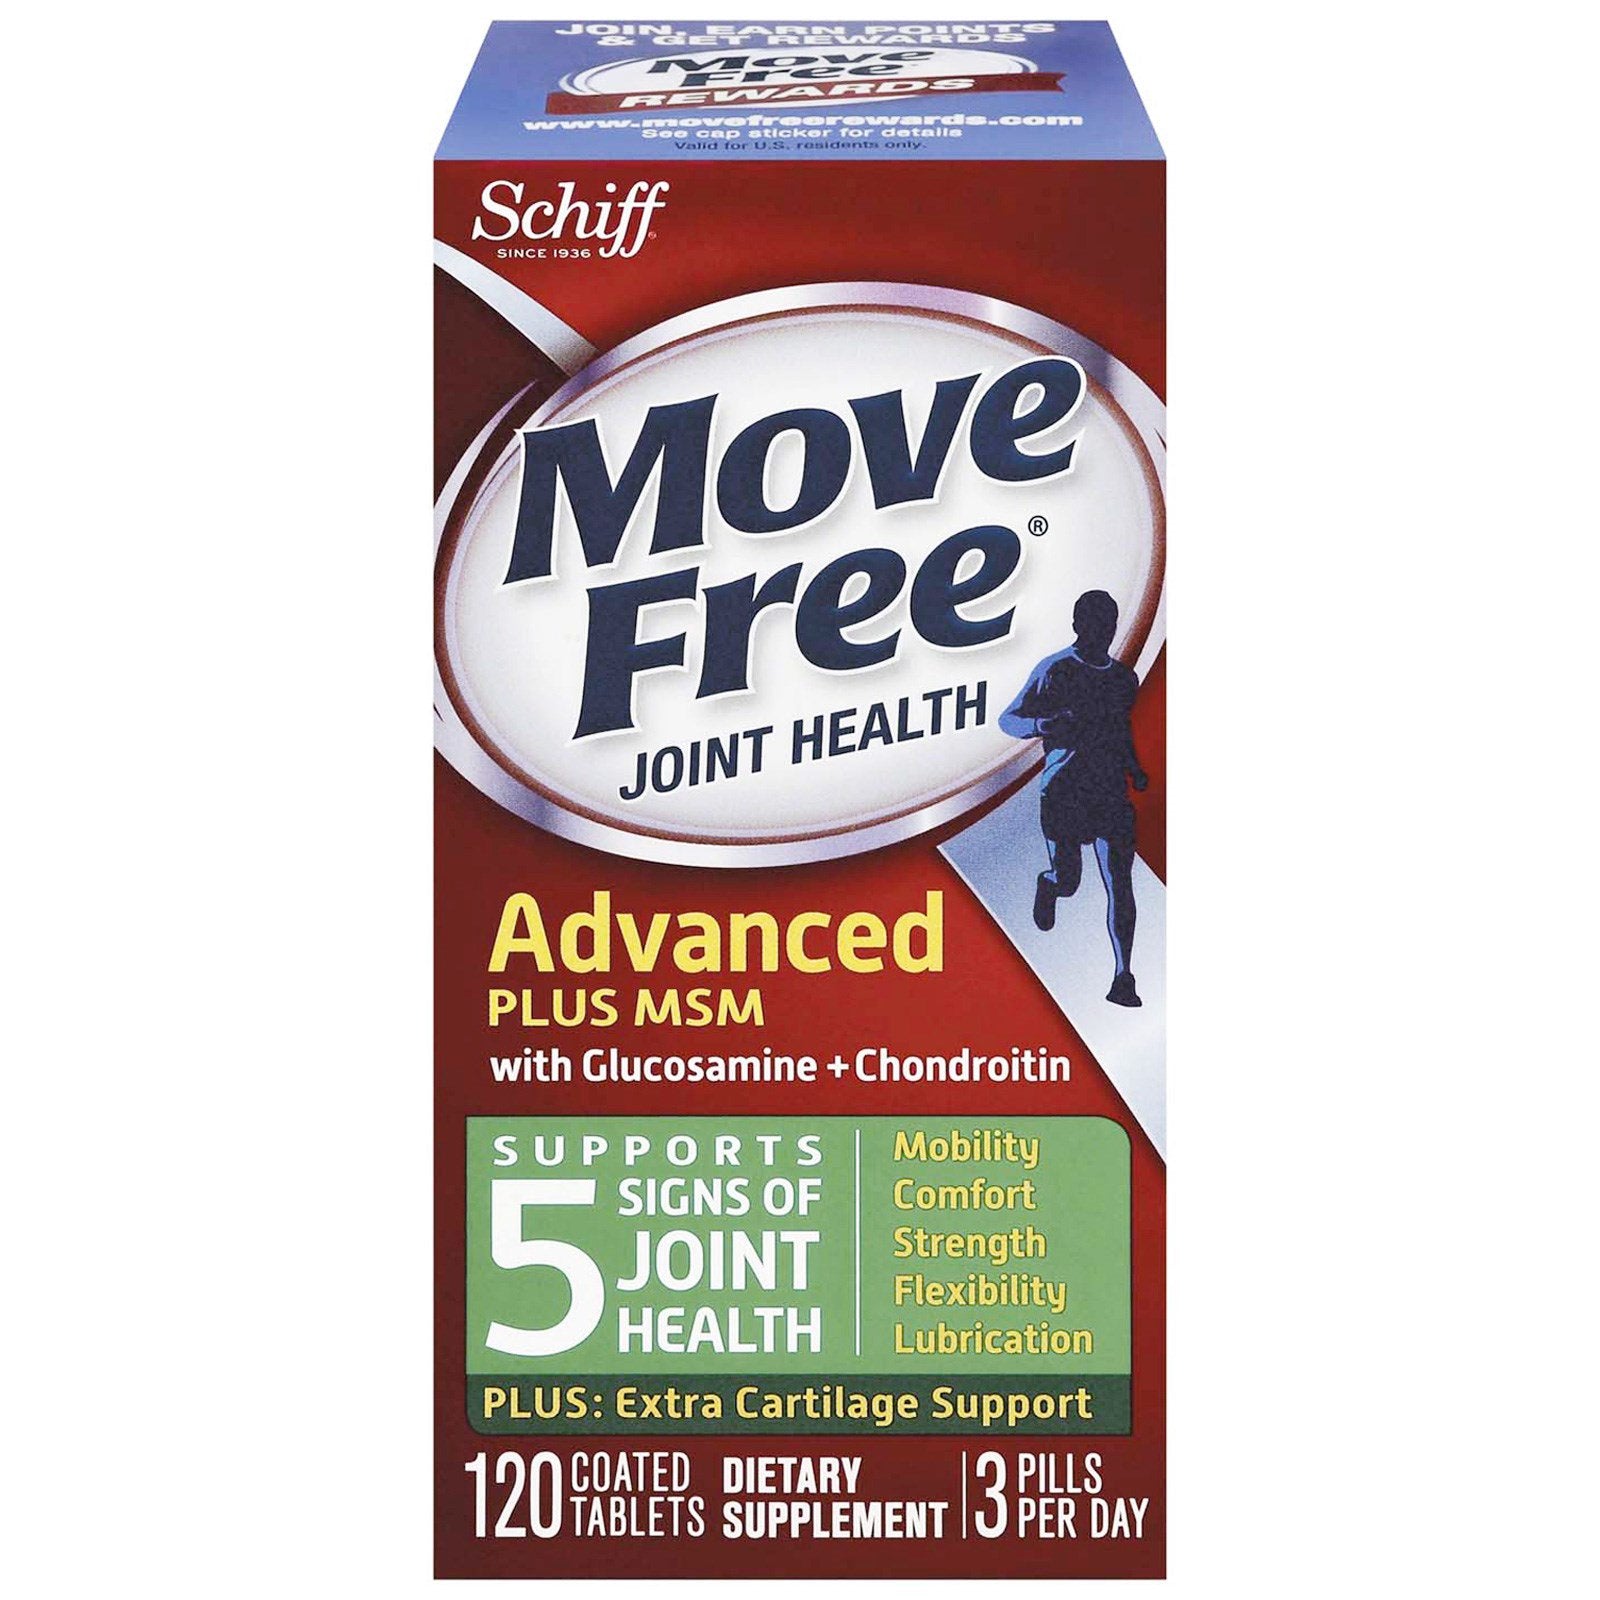 Schiff, Move Free, Advanced Plus MSM with Glucosamine & Chondroitin, 120 Coated Tablets